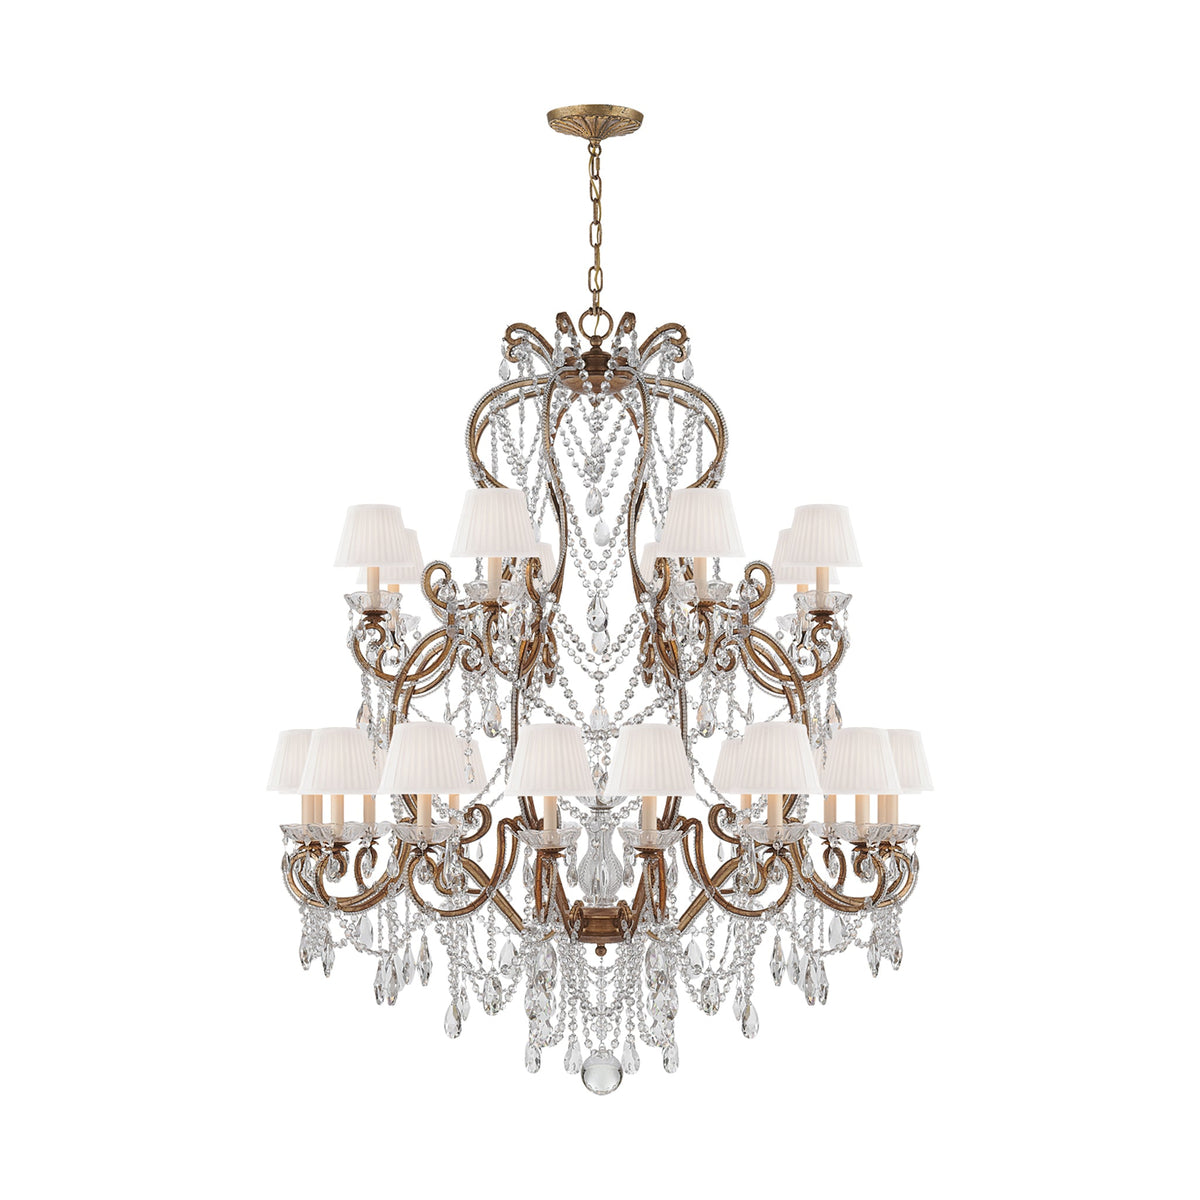 ADRIANNA LARGE CHANDELIER IN GOLDED IRON AND CRYSTAL WITH SILK SHADES